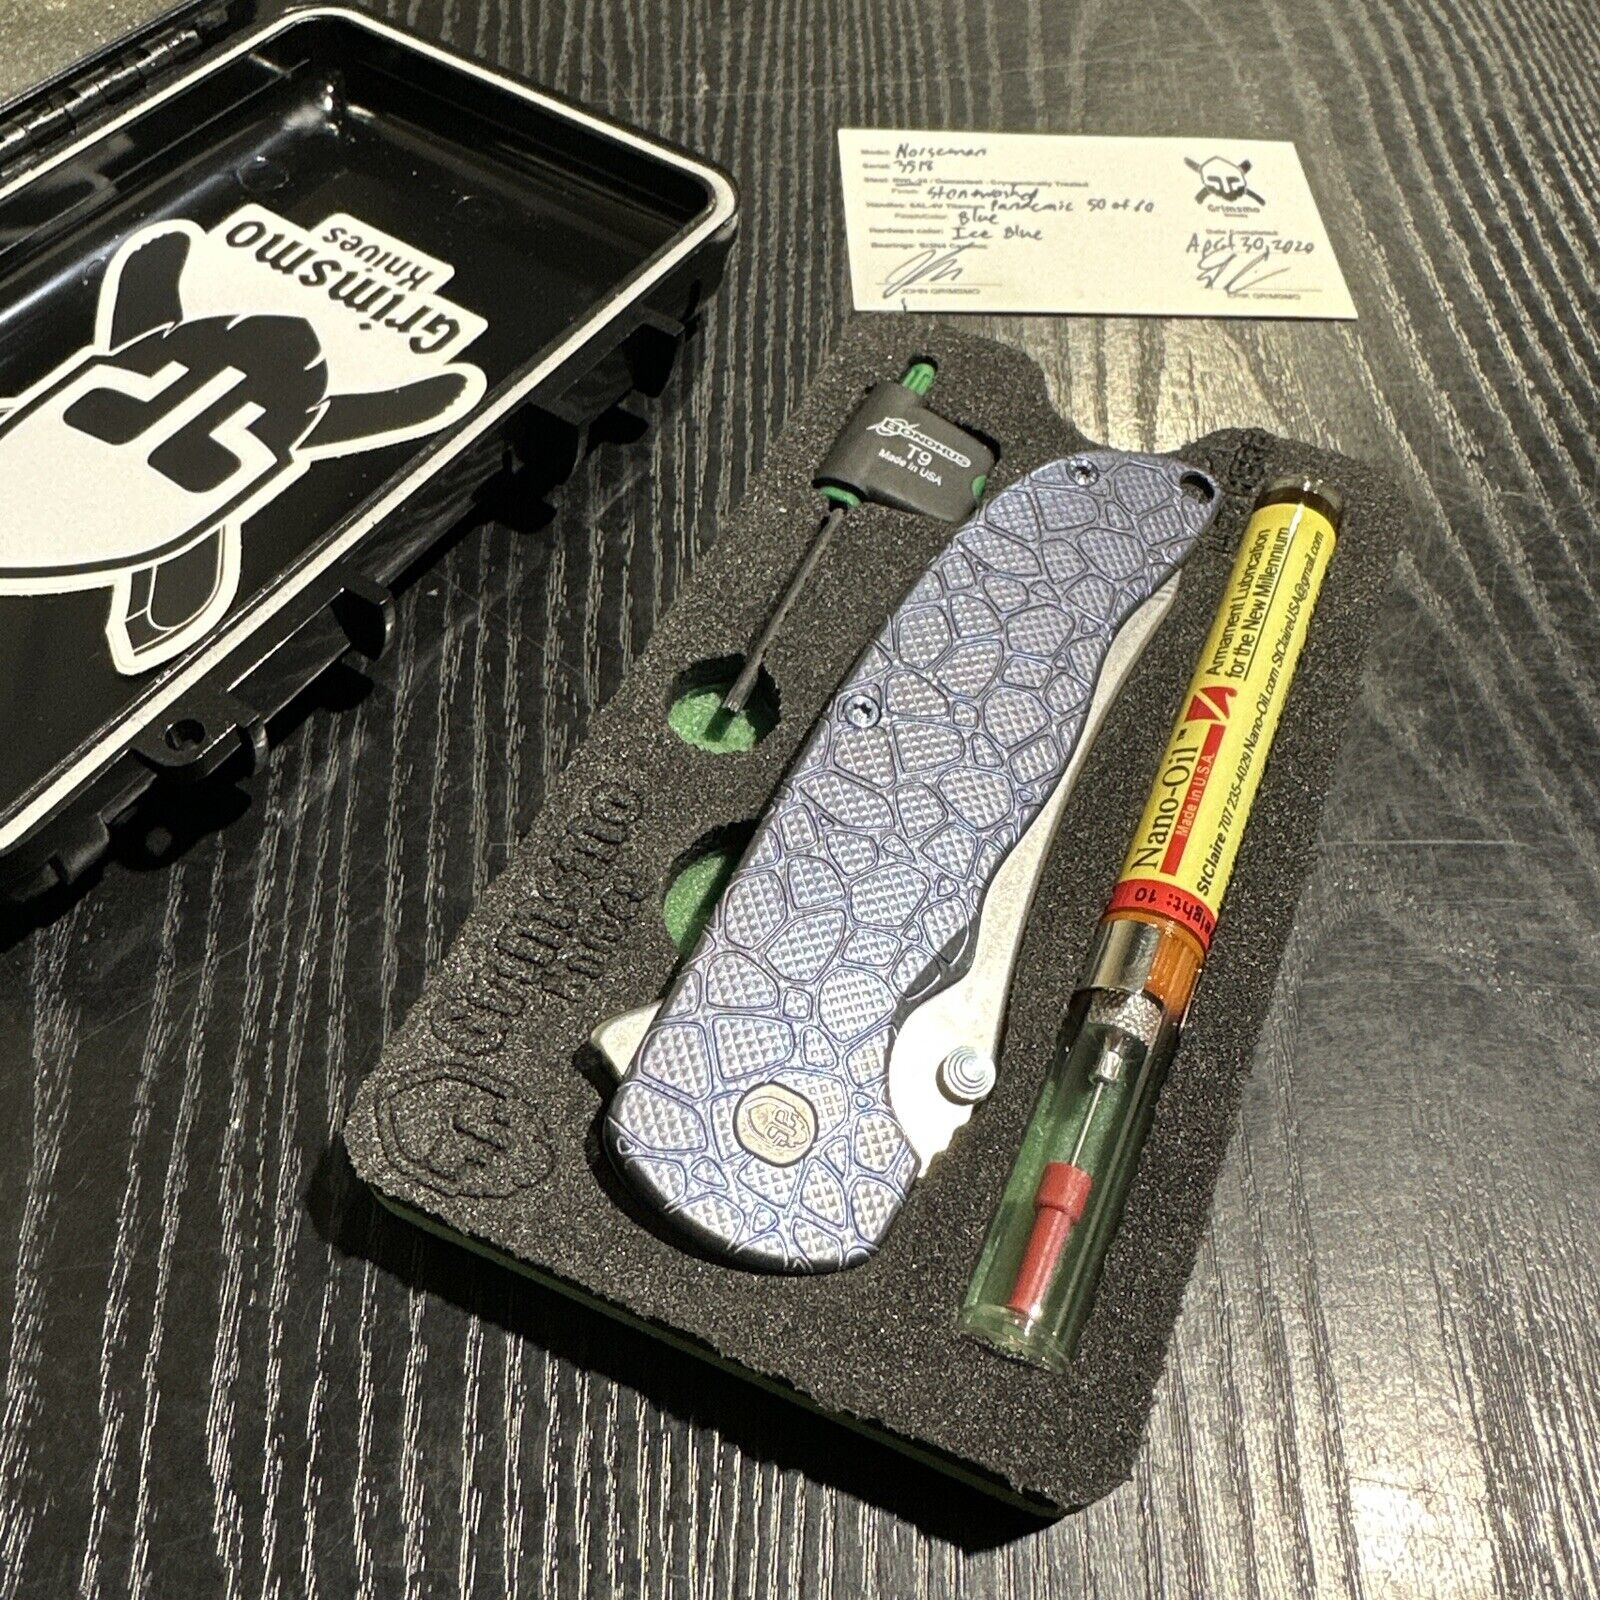 John Grimsmo Pandemic knife #50 out of #60 